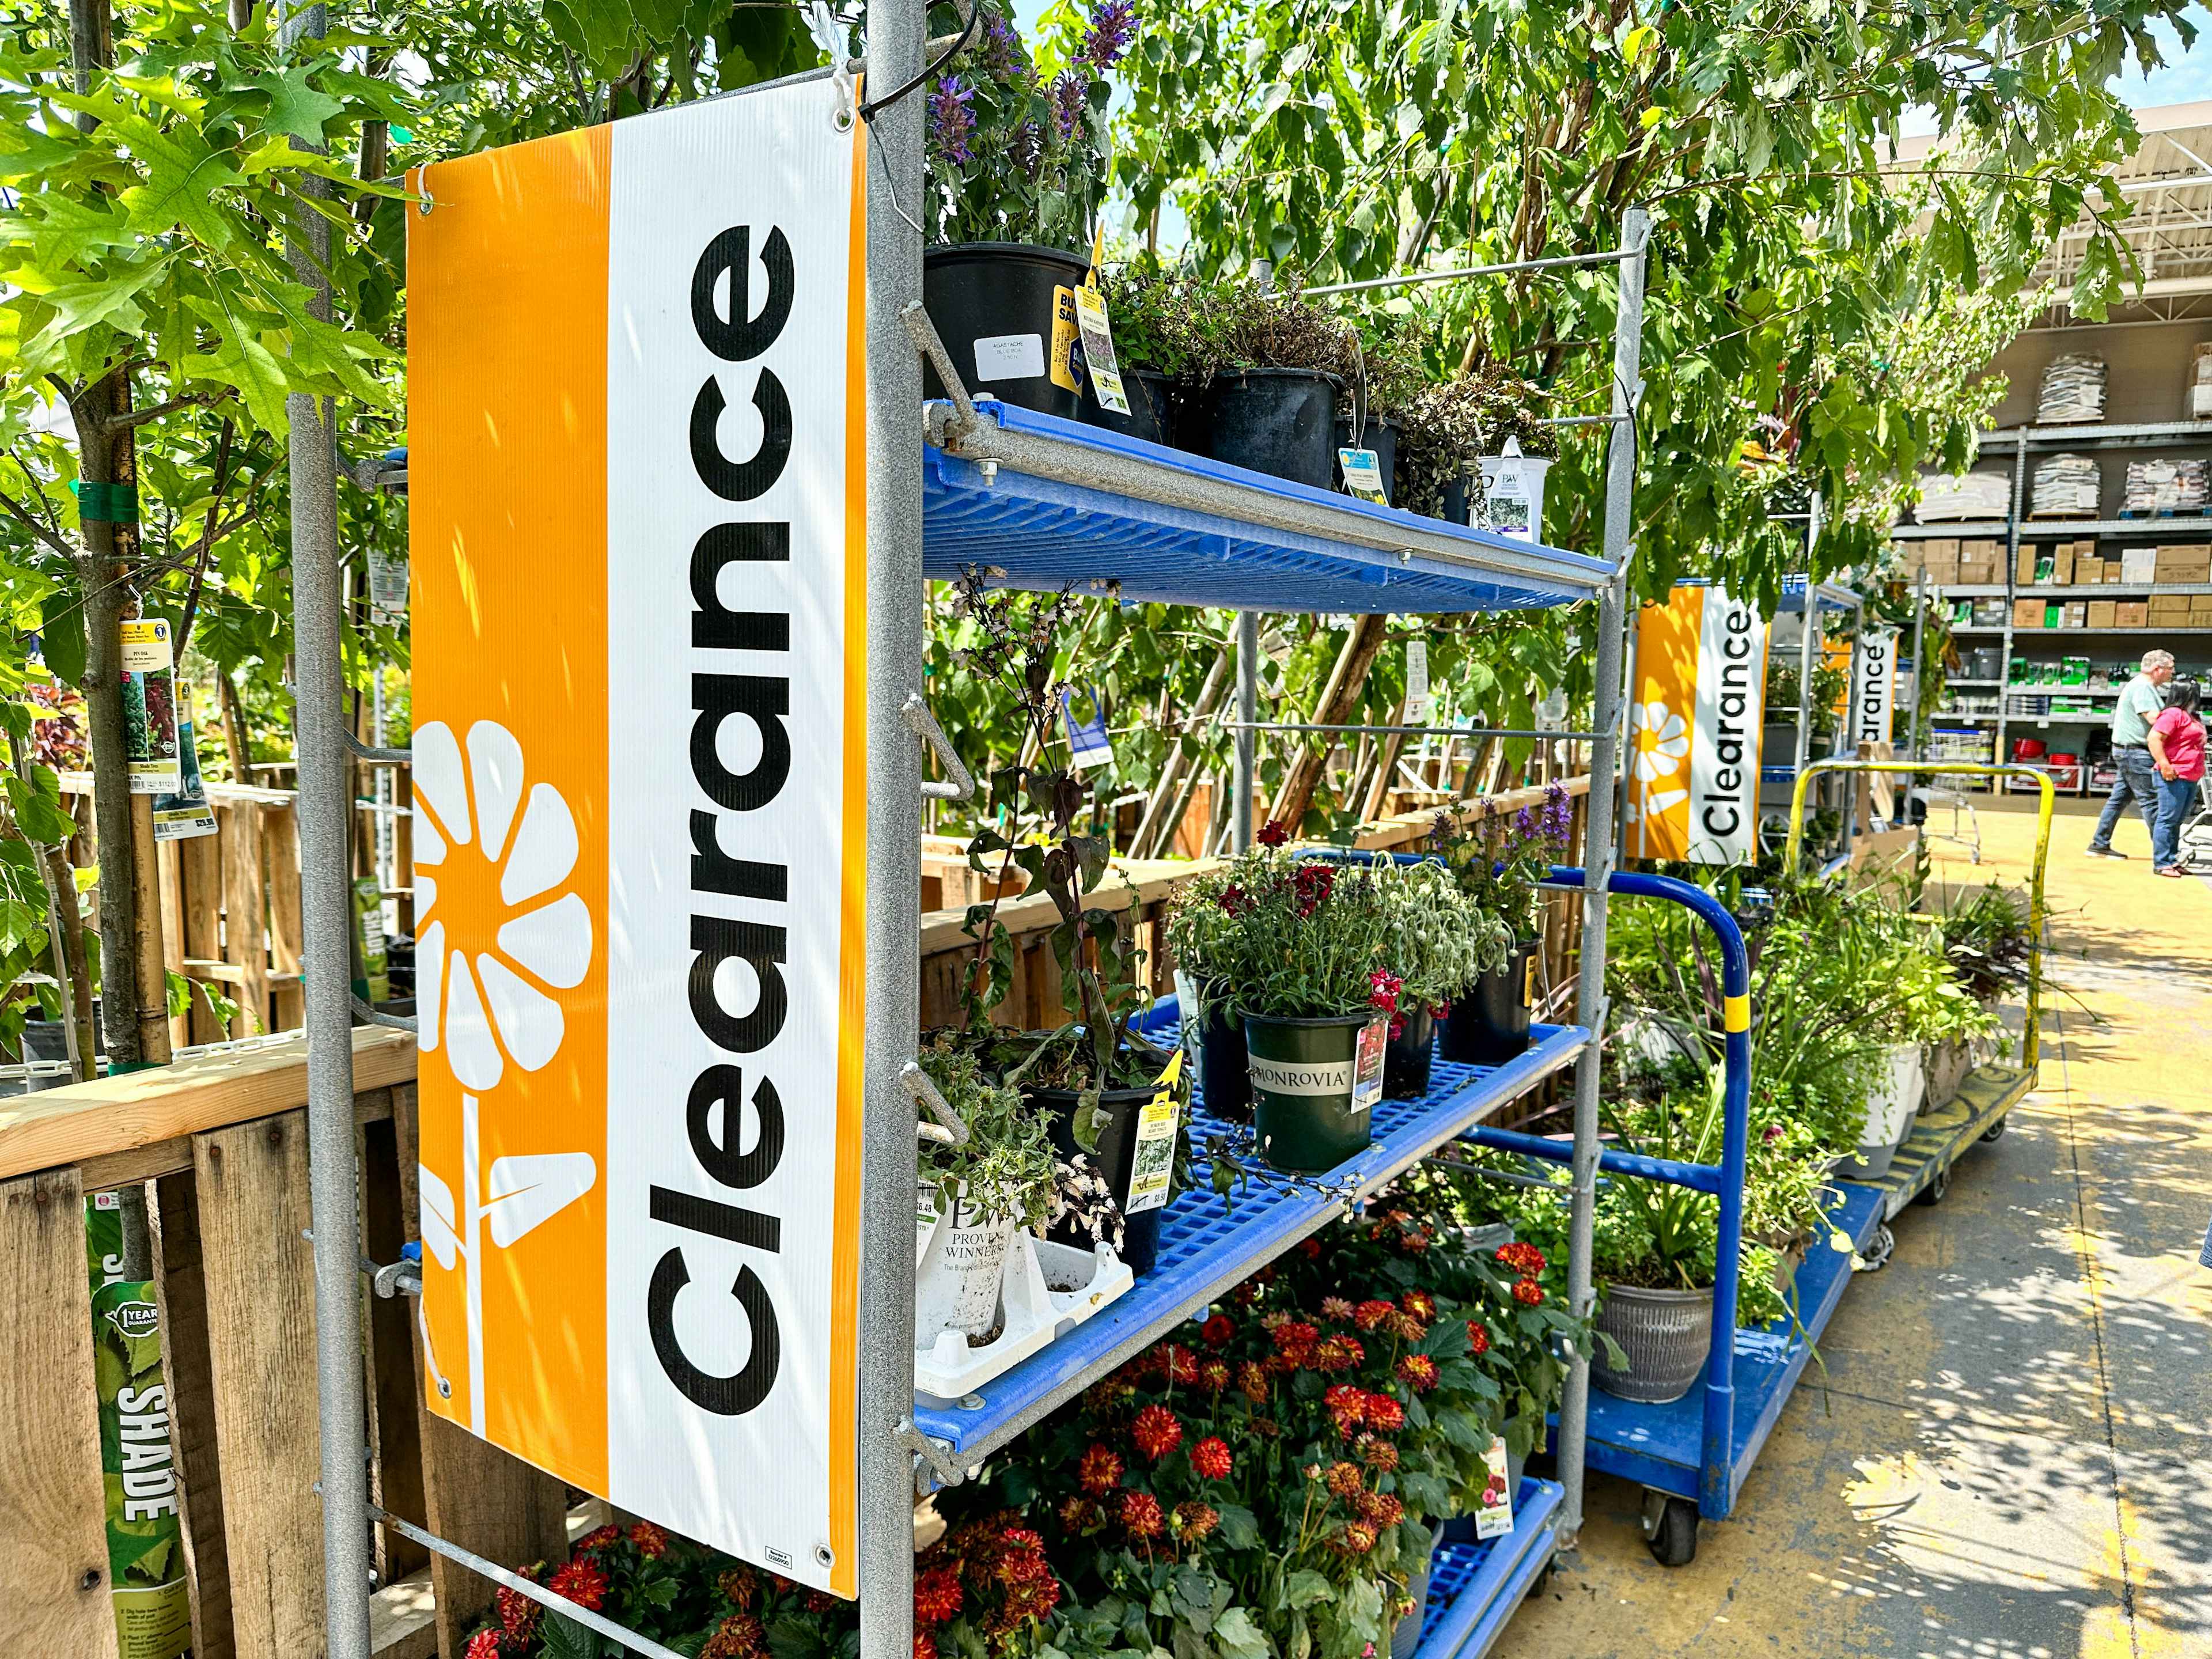 A woman shopping in the garden center plant clearance area